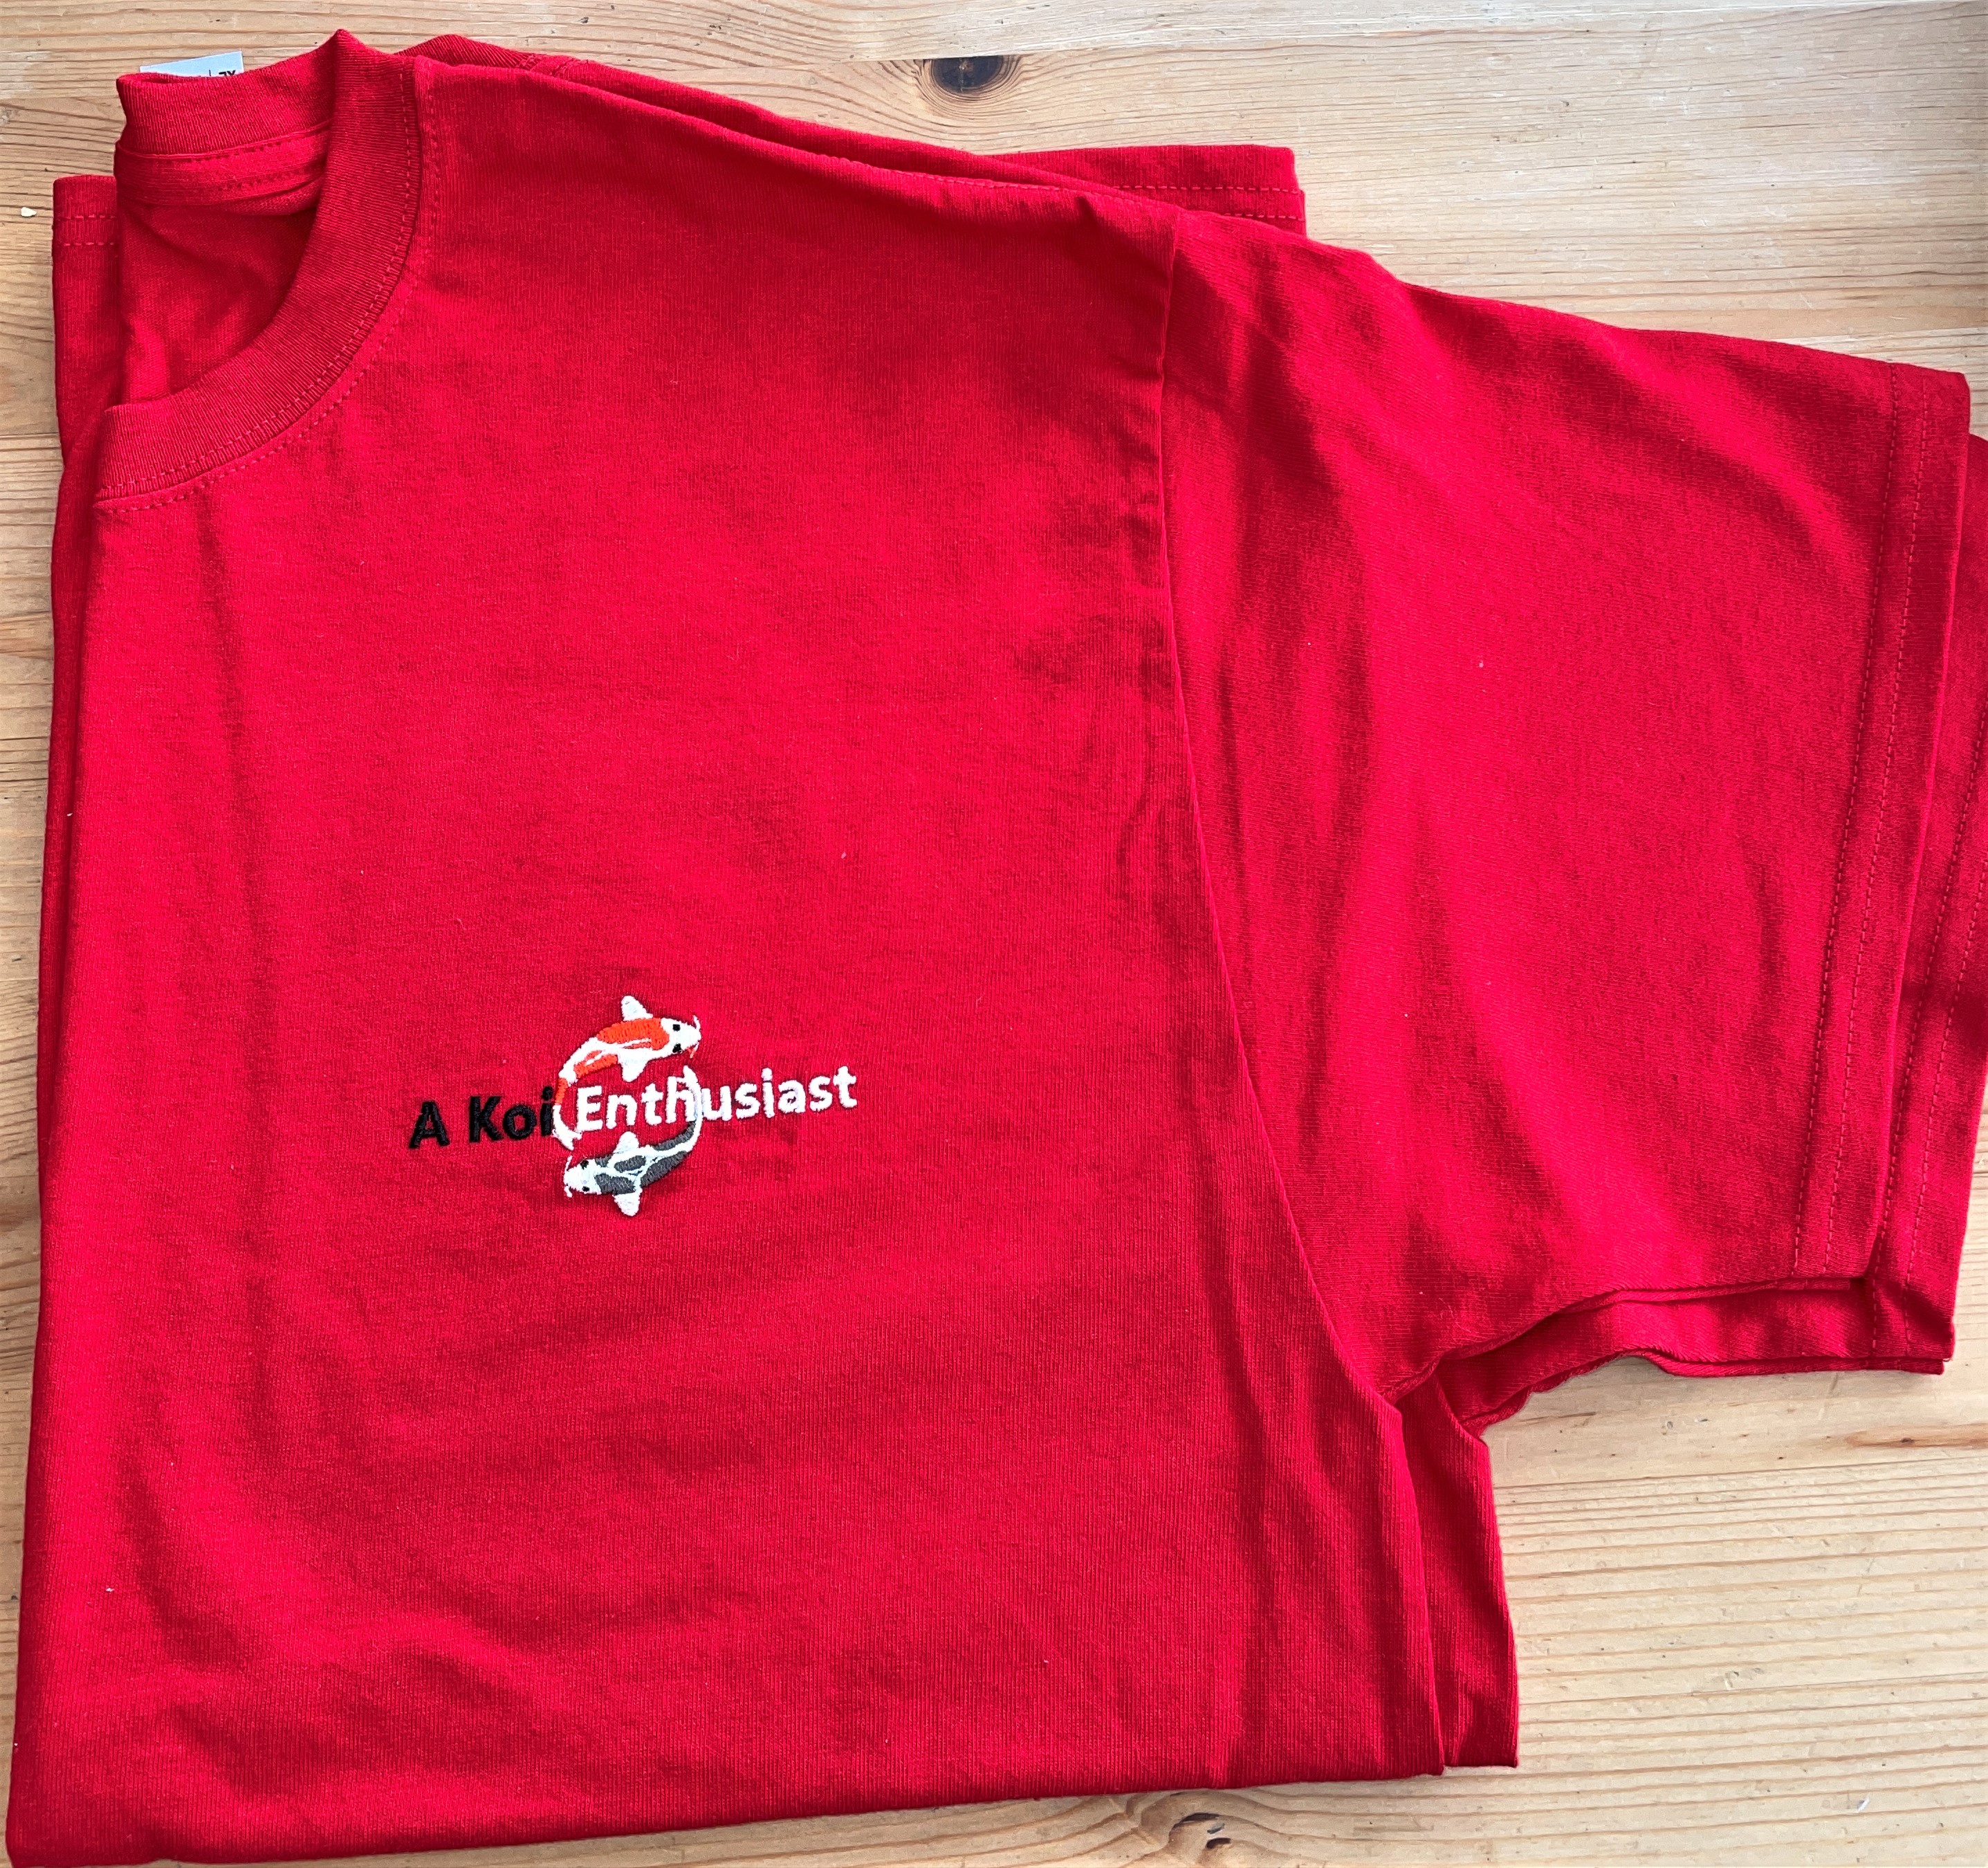 Cherry Red "A Koi Enthusiast" Embroidered Gildan Ultra cotton™ Adult T-shirt